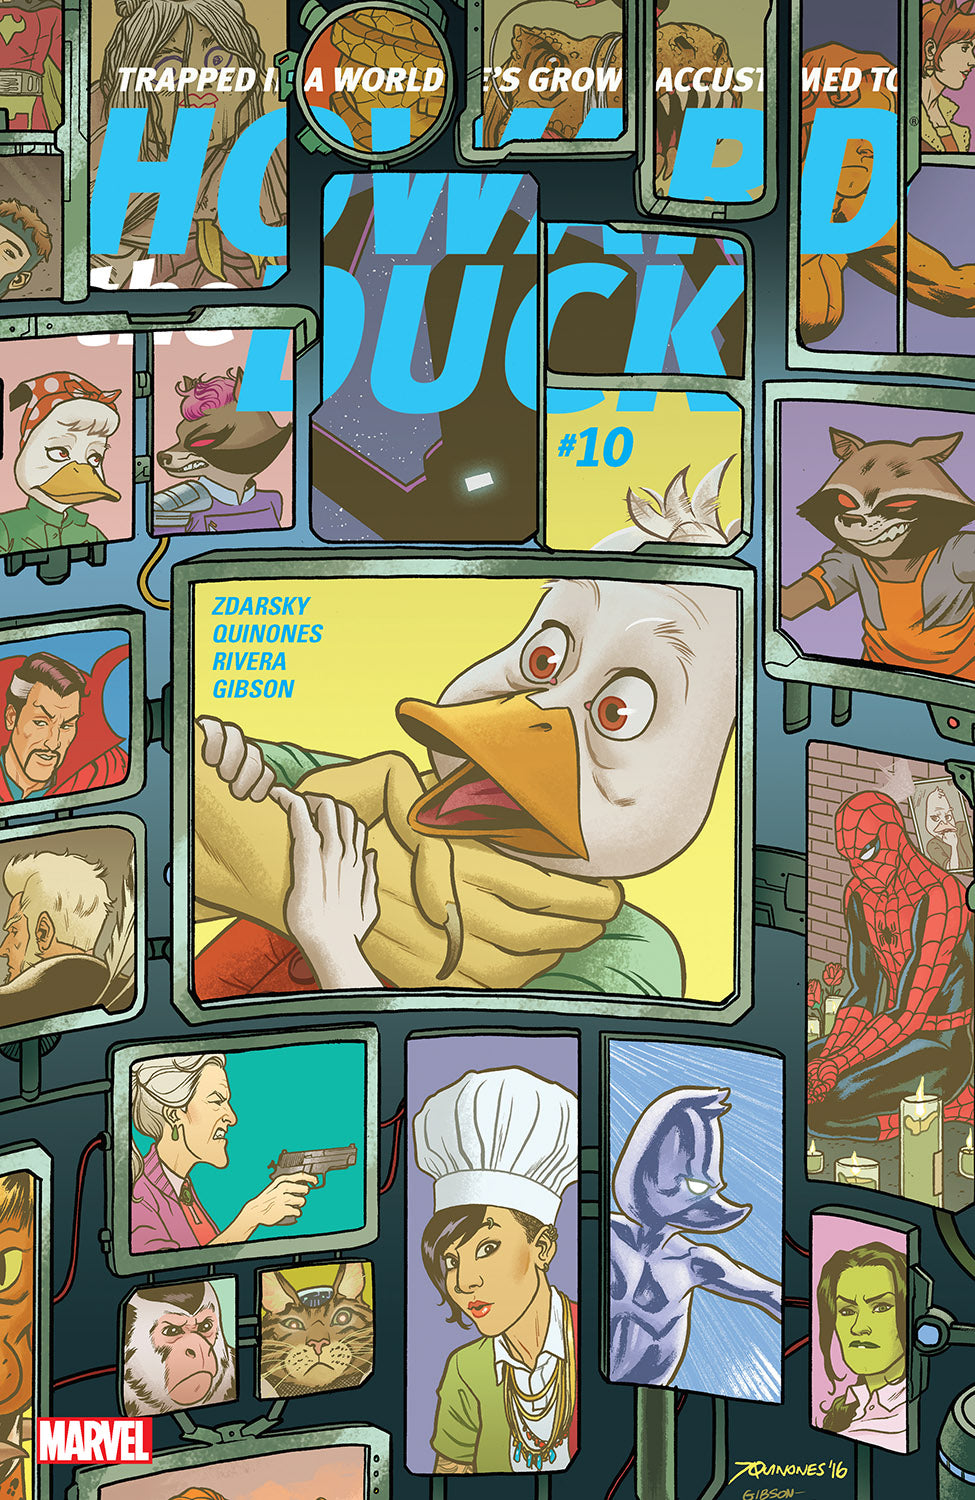 Howard the Duck Vol.6 #10 (2016) - Boxcat Games & Collectibles